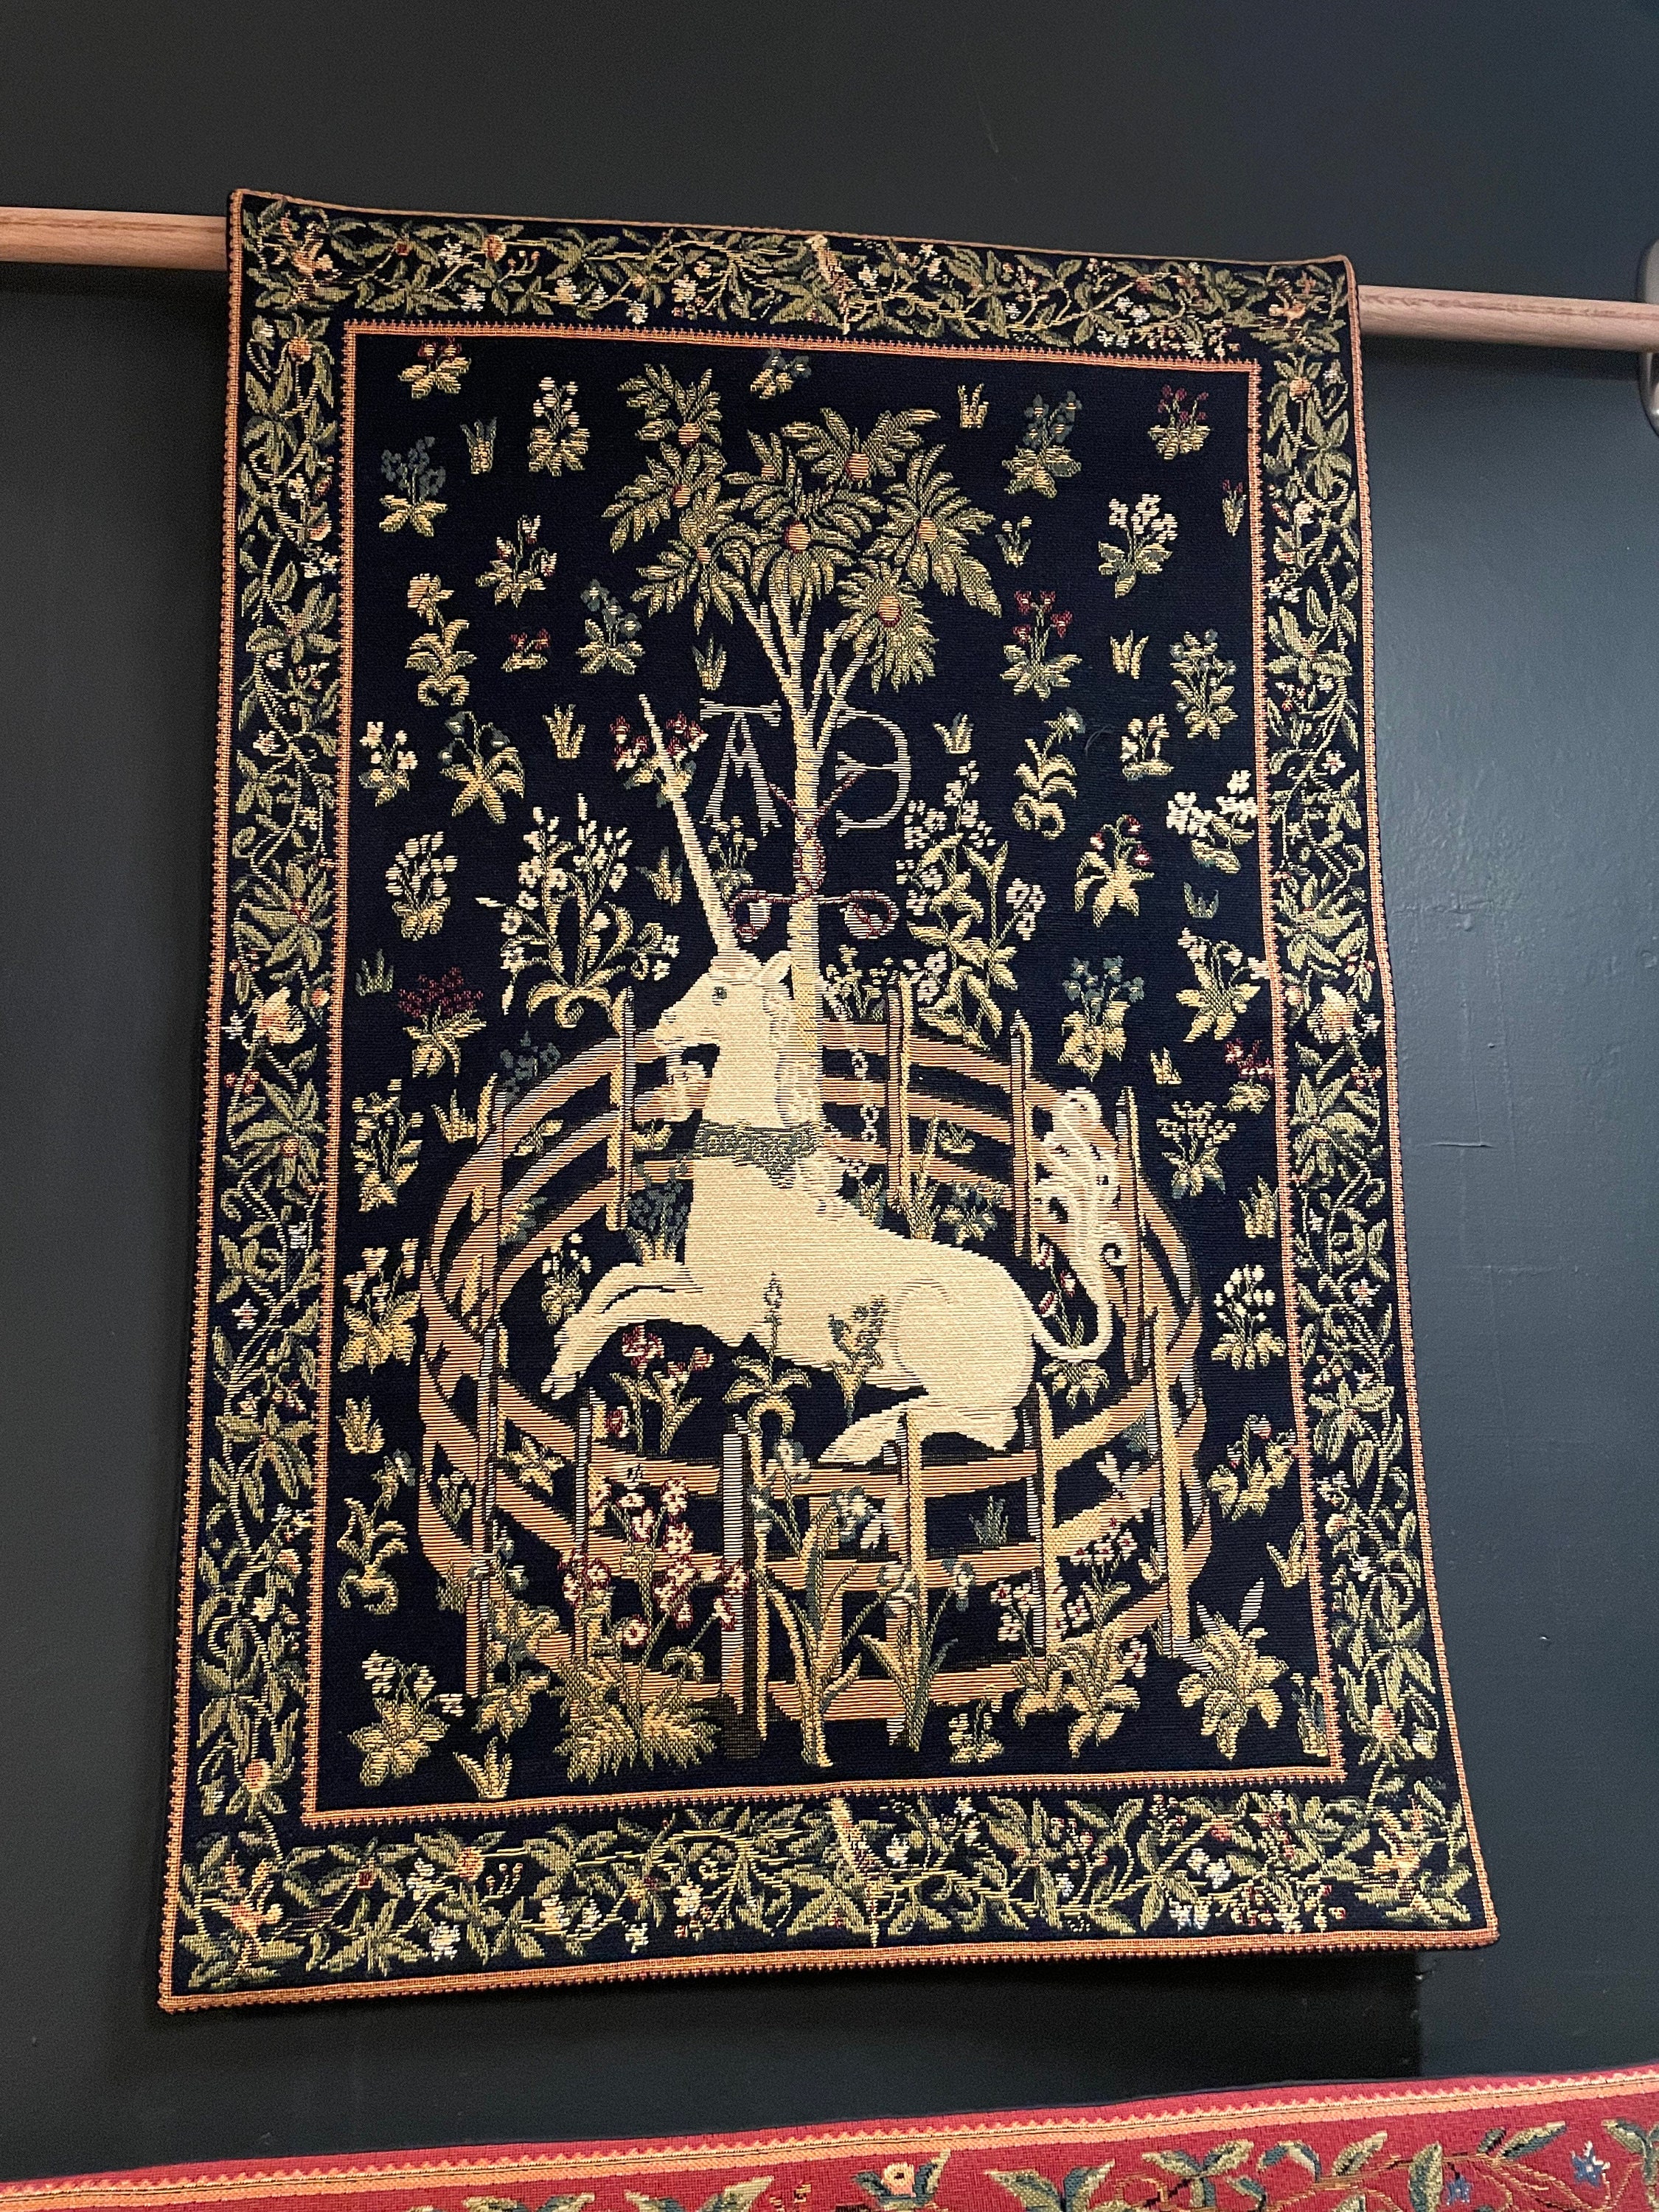 Unicorn Tapestry Wall Hanging Unicorn in Captivity Wall Decor Medieval  Tapestry Medieval Decor Blue Wall Hanging Tapestry 